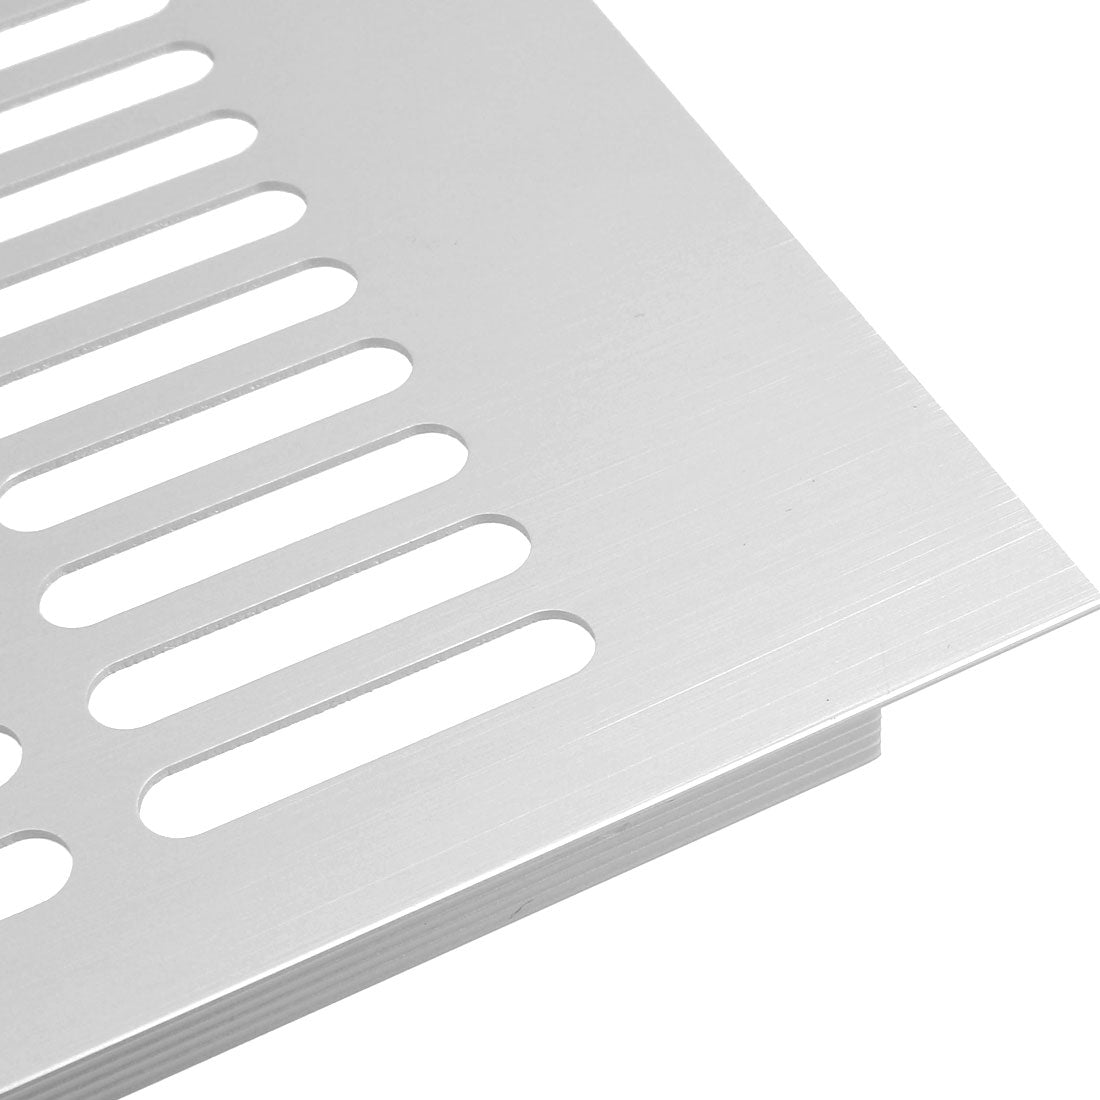 uxcell Uxcell 300mmx150mm Rectangle Shape Air Vent Louvered Grill Cover Ventilation Grille